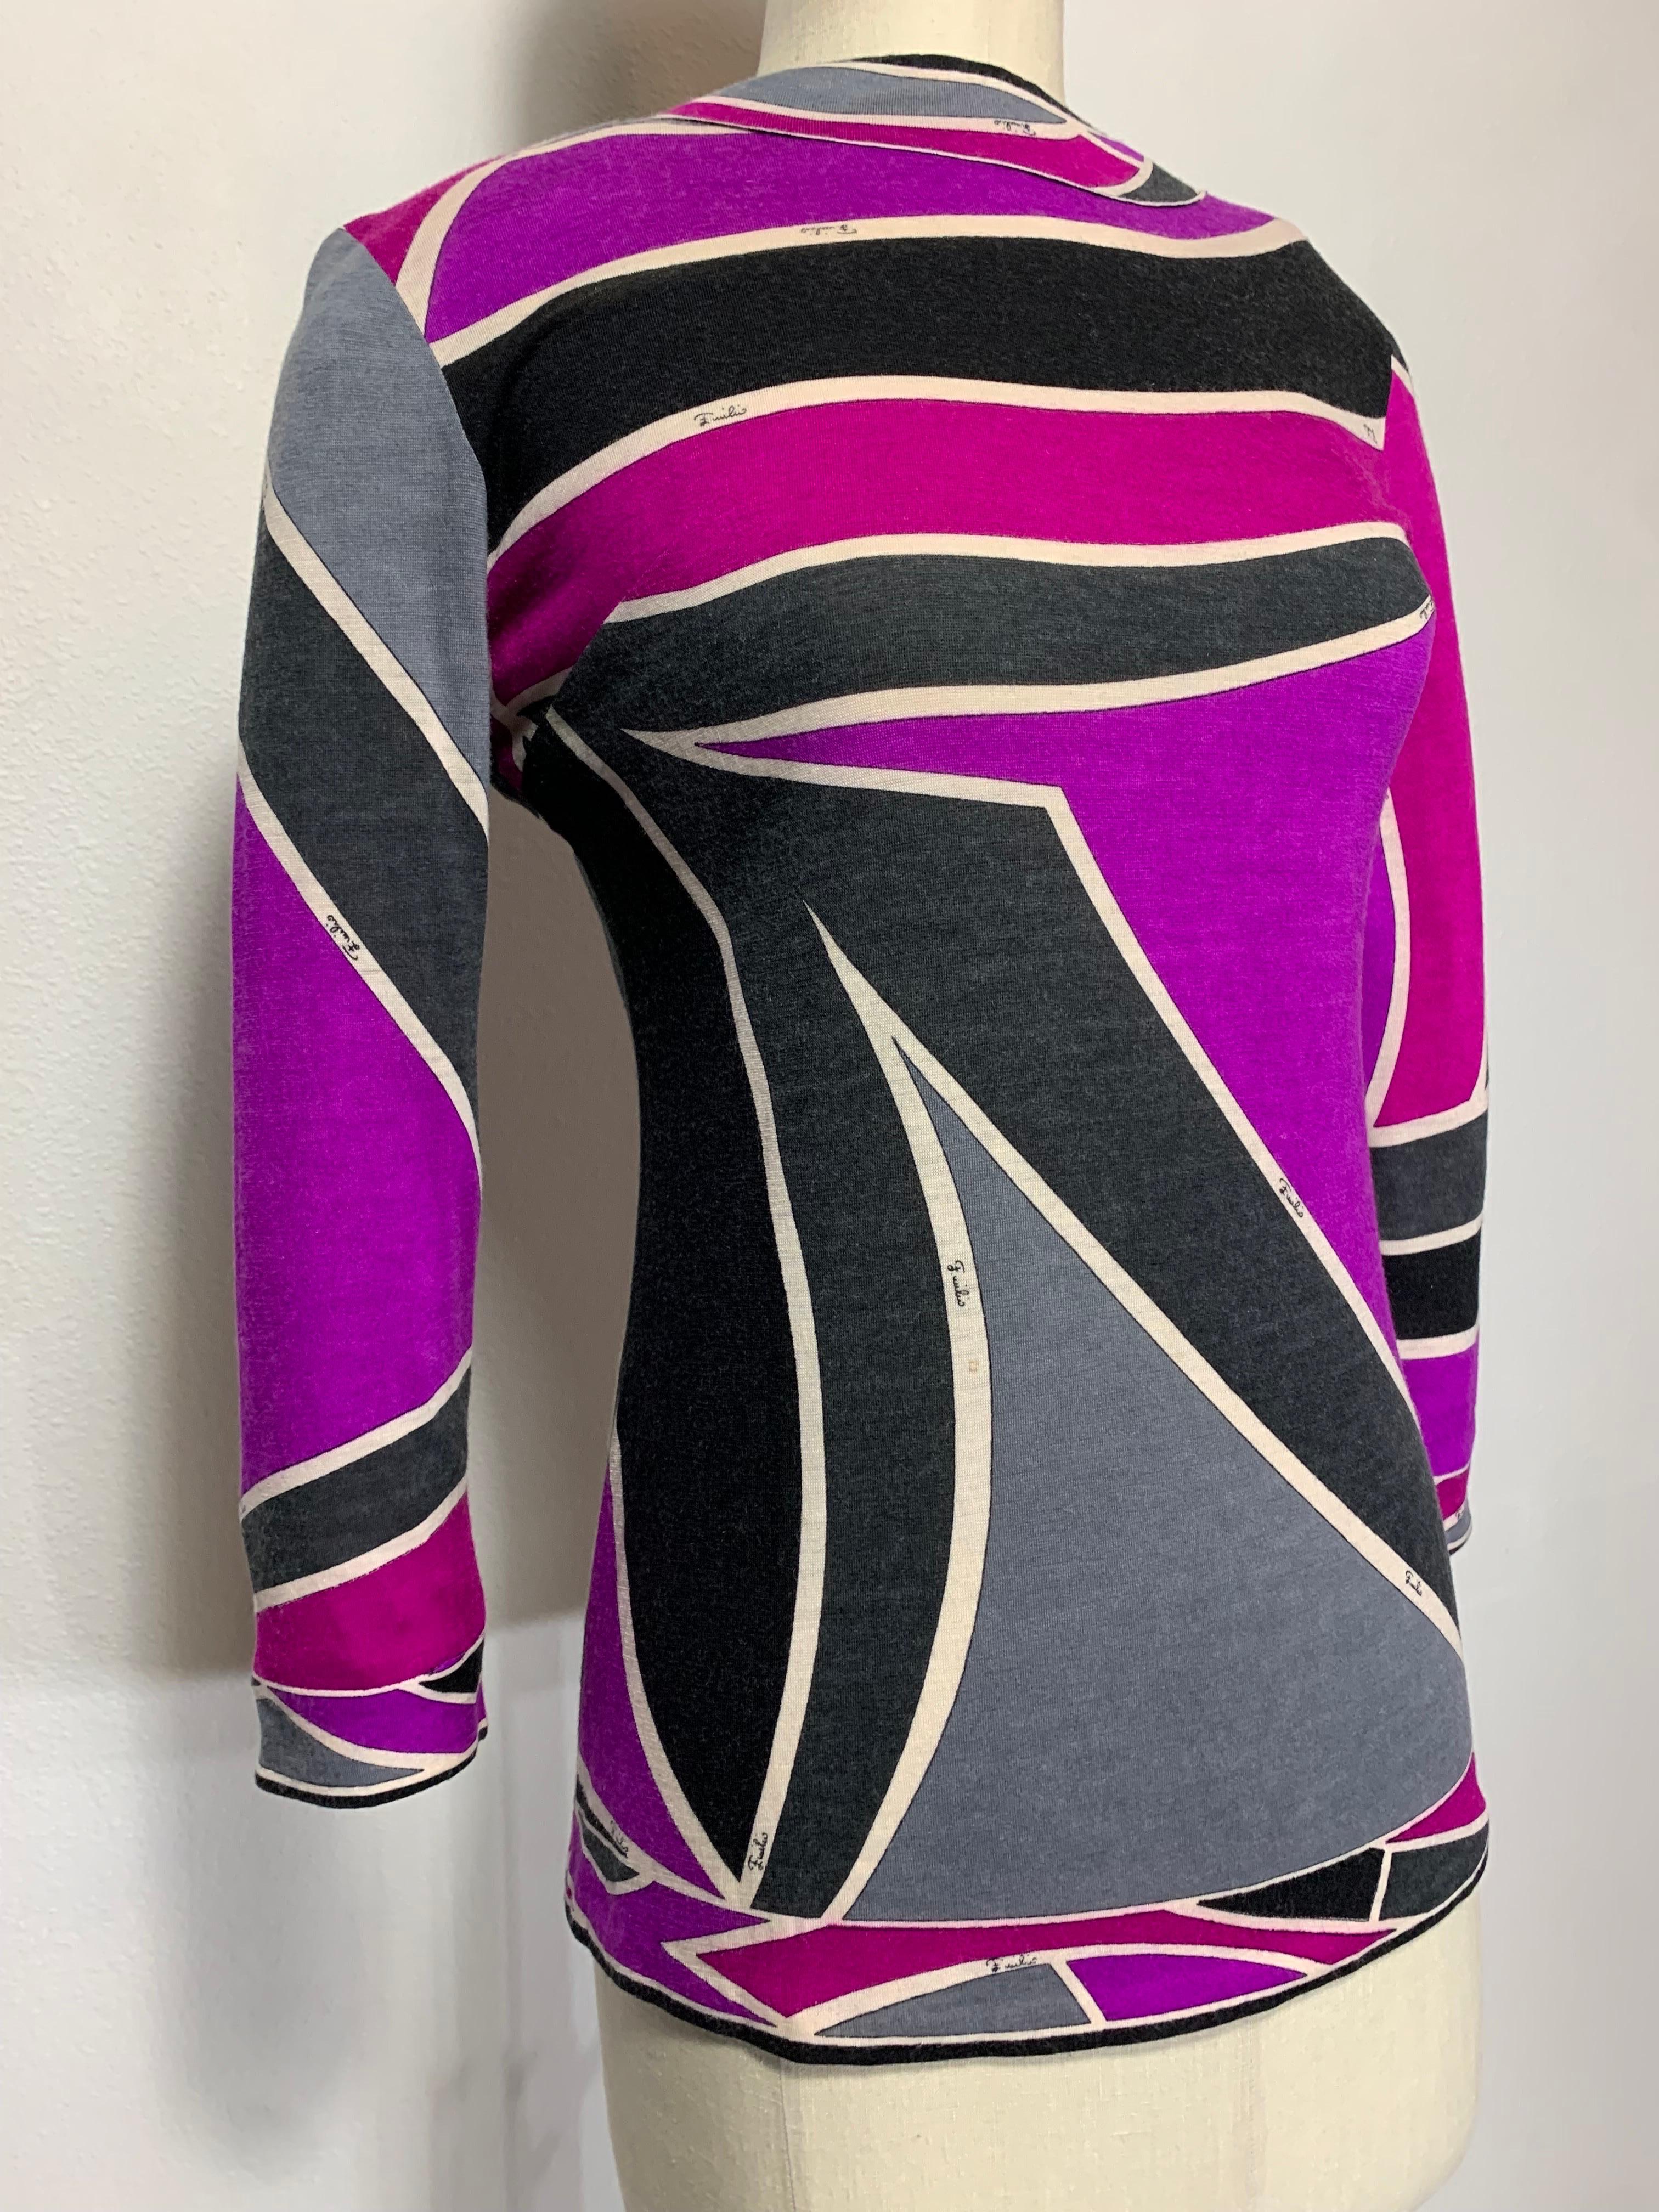 1960s Emilio Pucci Cashmere & Silk Graphic Print Knit Pullover Sweater:  A hard-to-find cashmere blend fine-knit sweater from the iconic Mod print-master!  In fuchsia, grape, gray, black and white with a banded neck, cuffs and hem. Long invisible